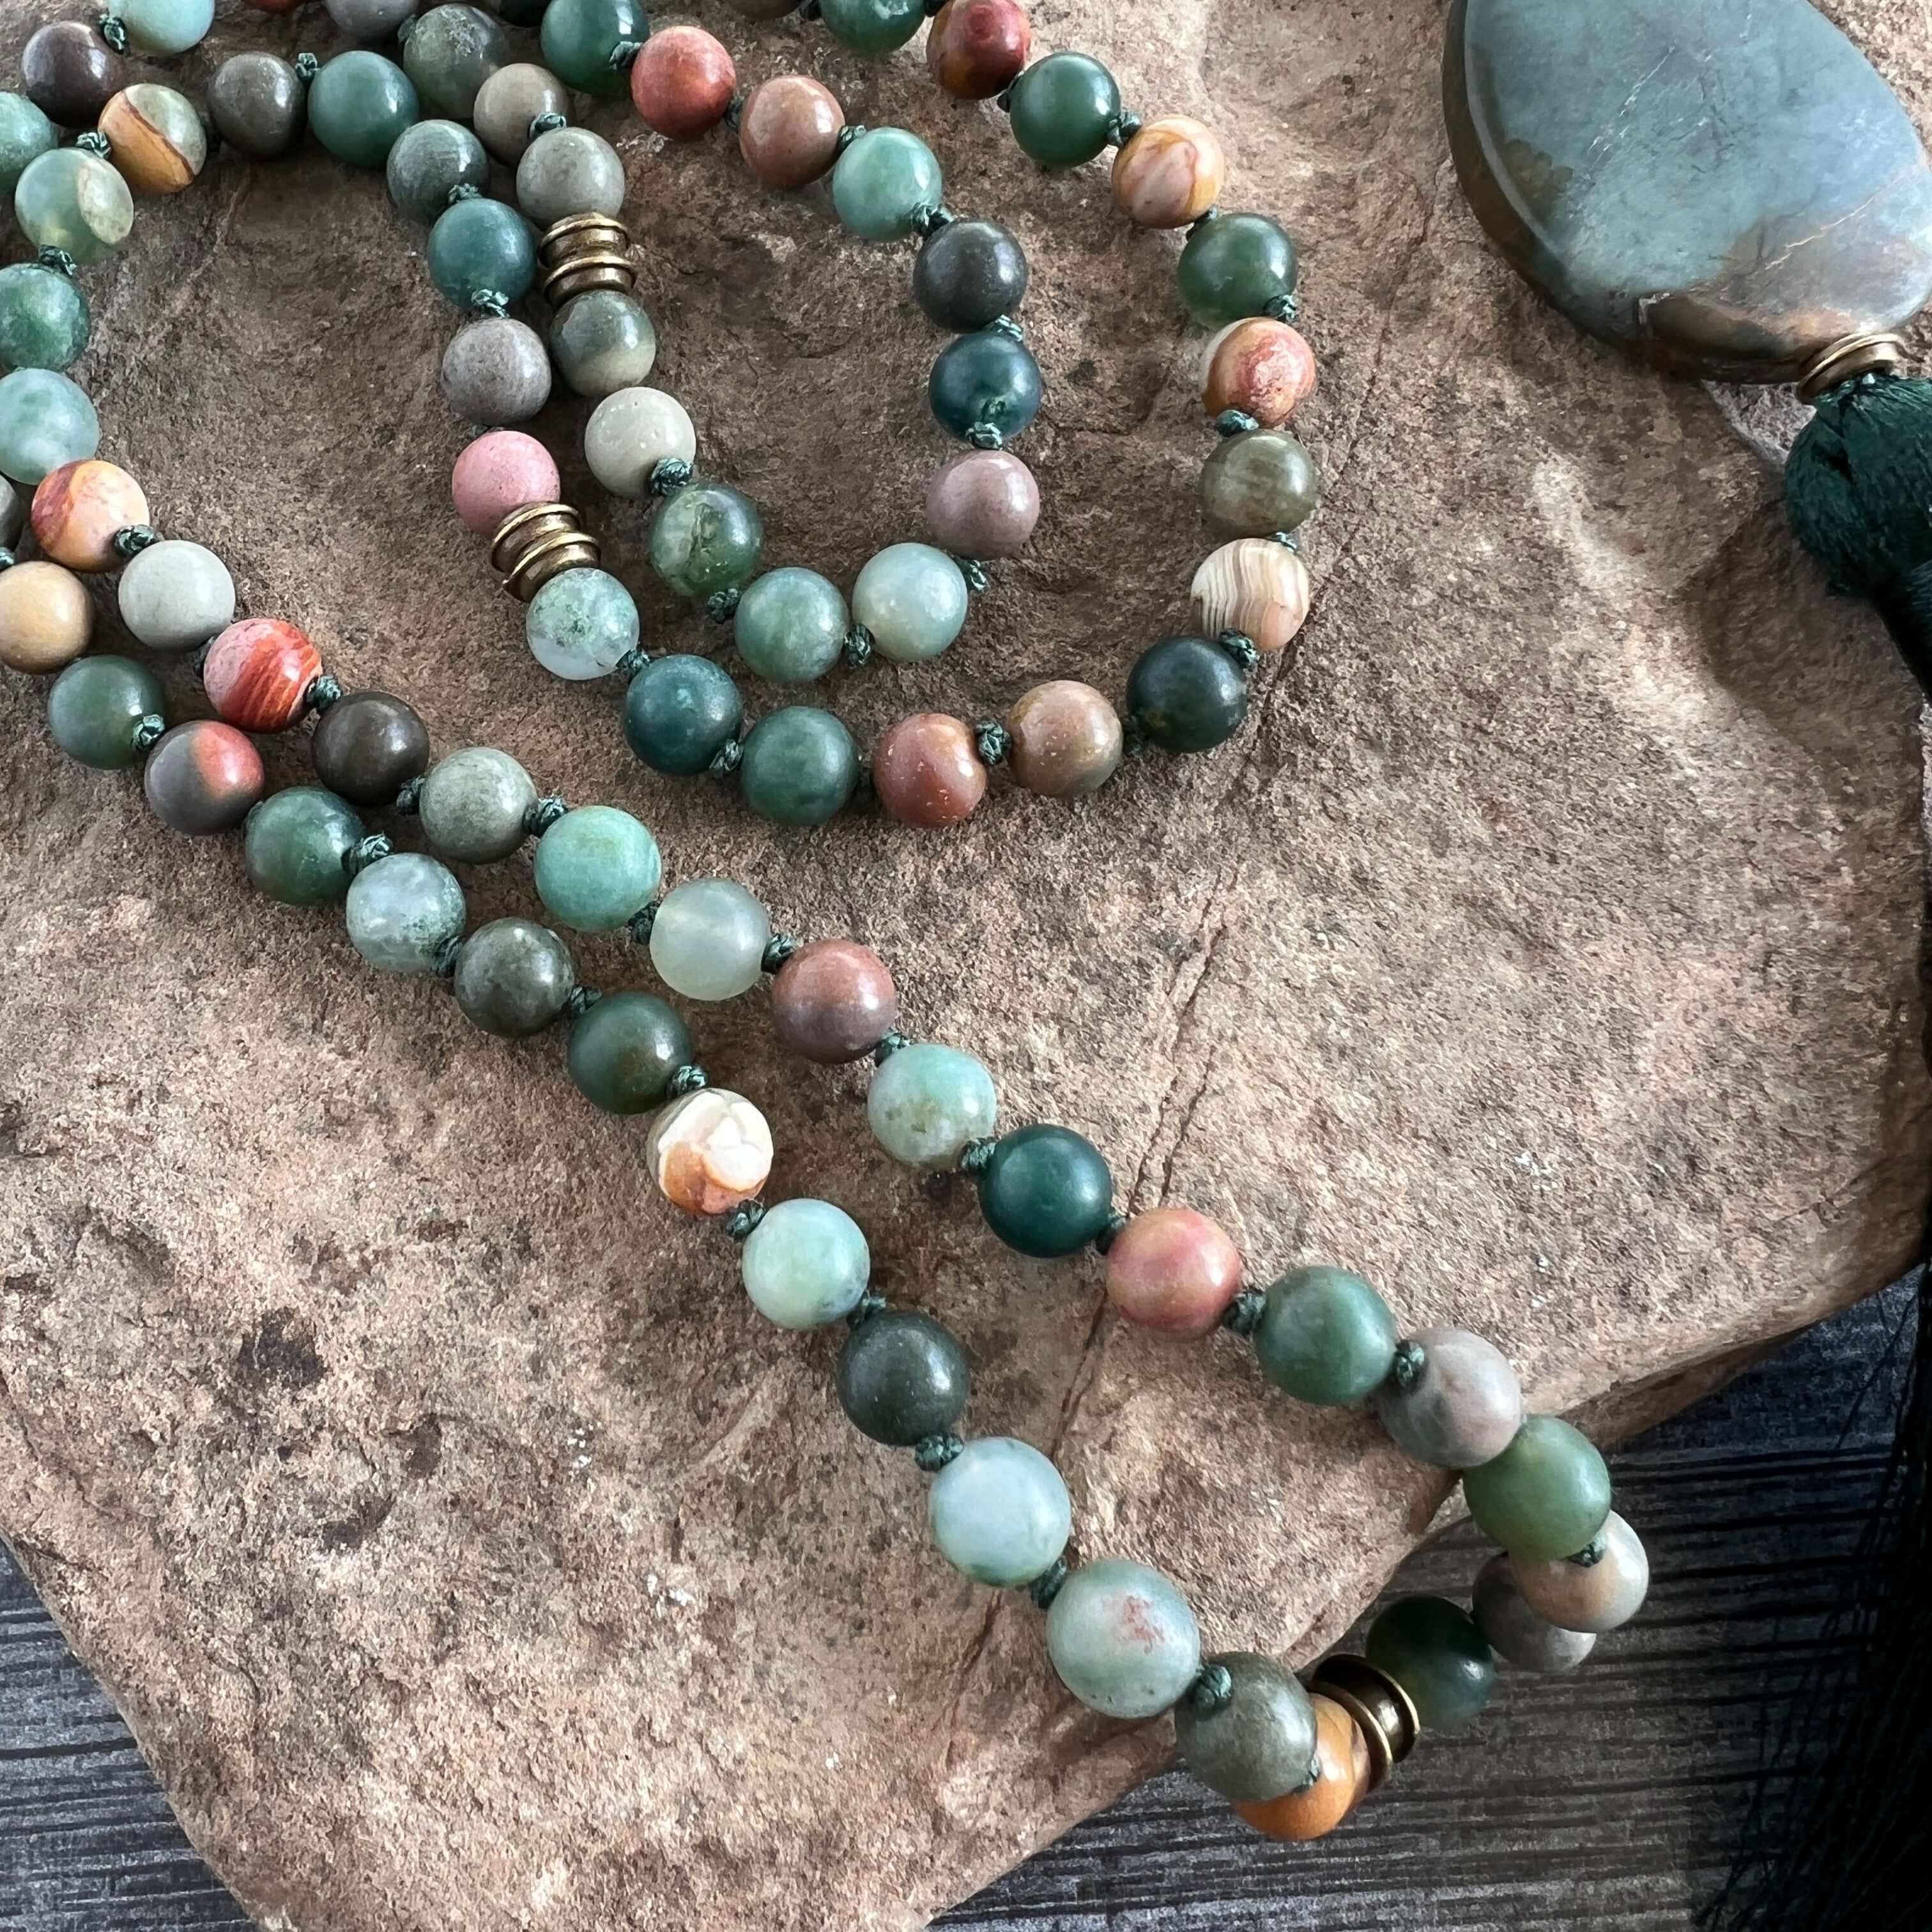 Forest Walk Mala This mala is made with high-quality Agate and Jasper gemstones which bring strength and tranquility to the wearer. Zodiac Signs: Leo, Gemini, Aries, Scorpio, and Virgo. Chakras: Third Eye, Root, Crown, and Heart. Handmade with authentic c